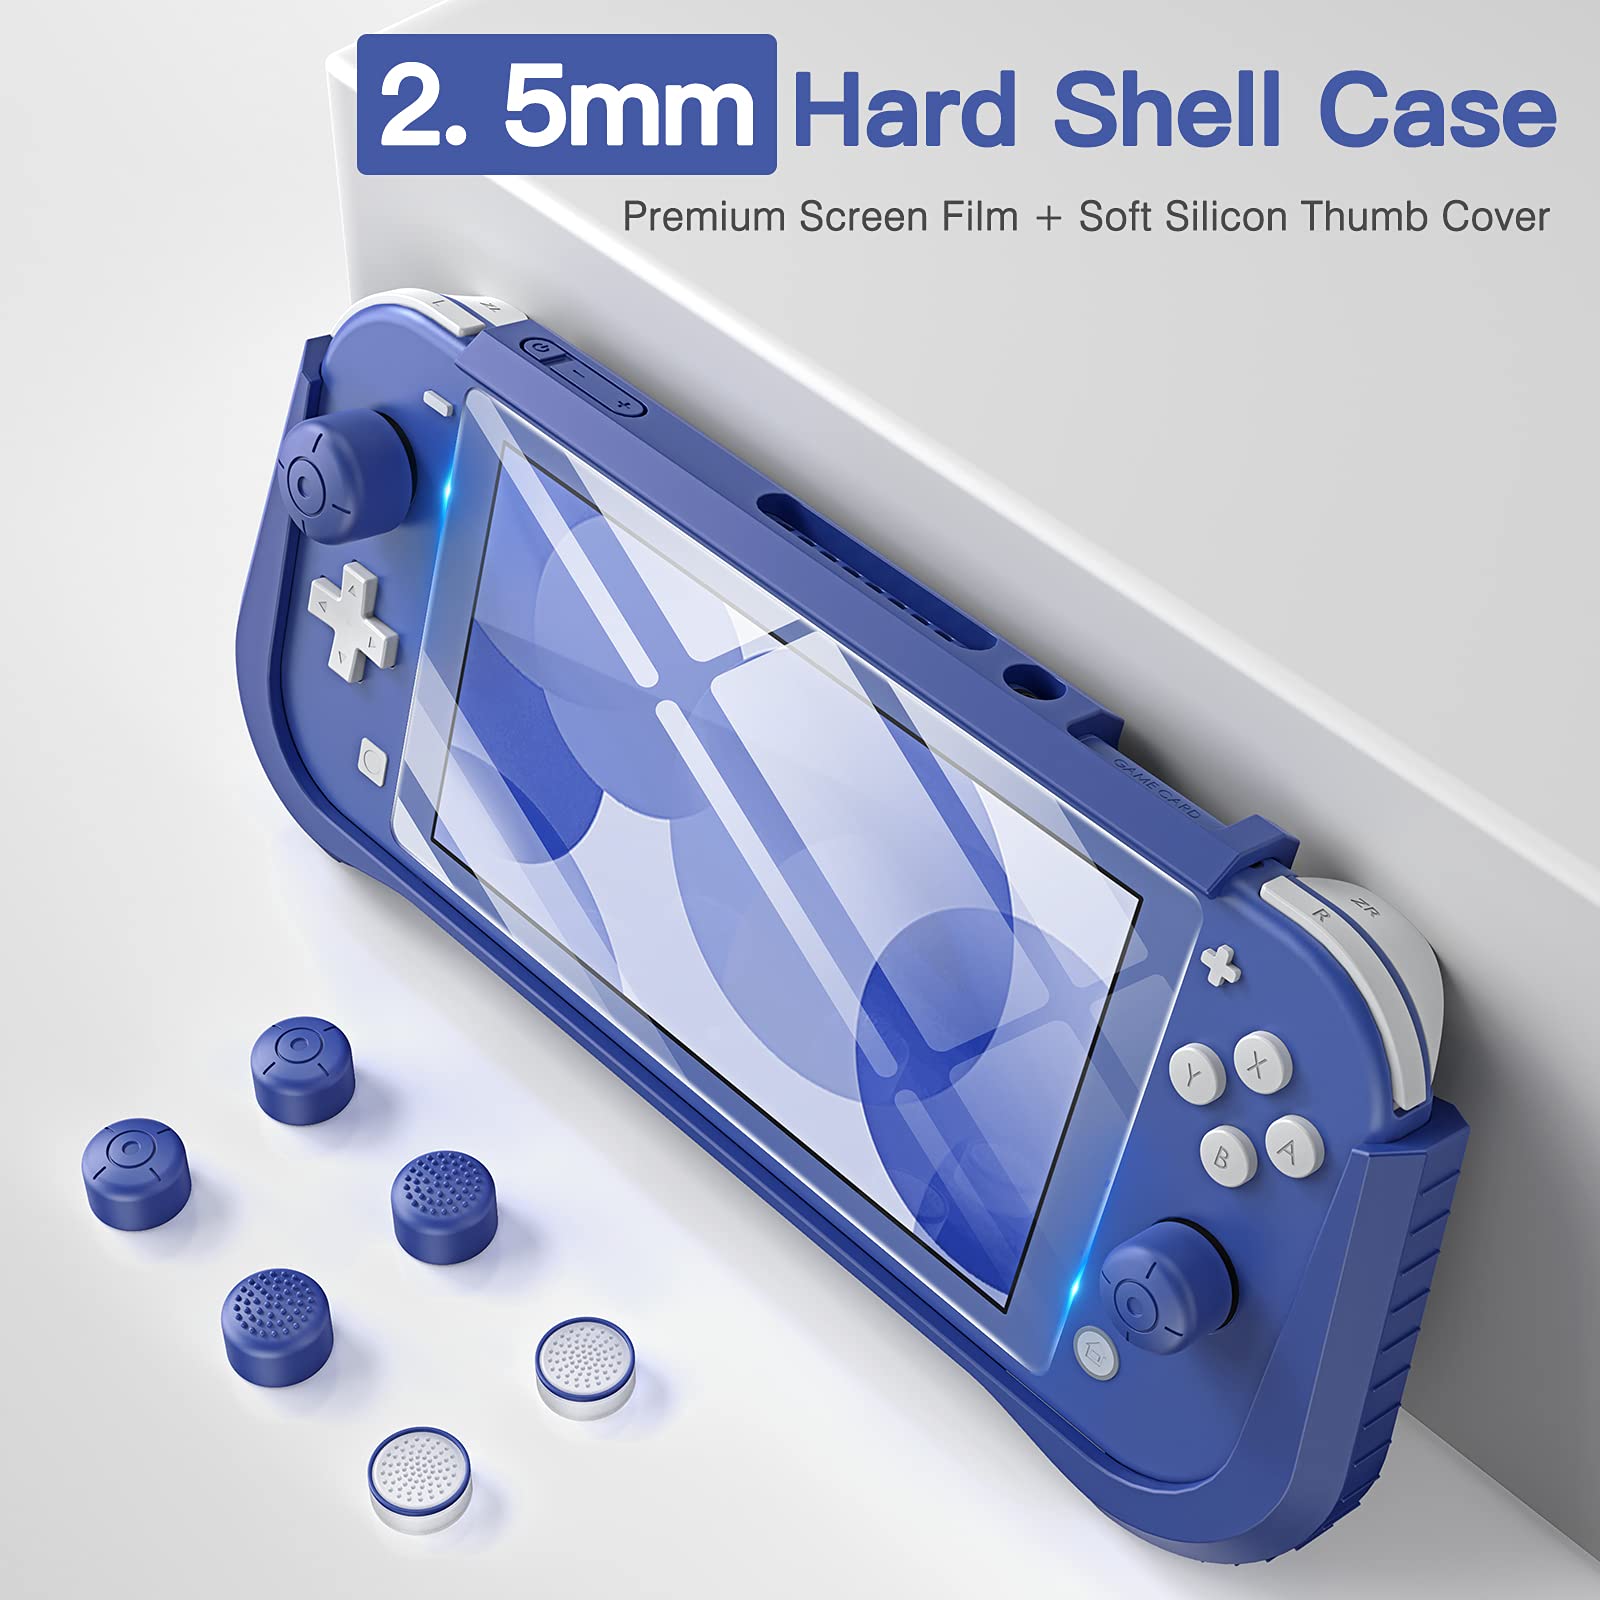 HEYSTOP Switch Lite Protective Case with Screen Protector and 6 Thumb Grips, Ergonomic Grip Case for Nintendo Switch Lite, Anti-Scratch/Anti-Dust/Shockproof (Blue)